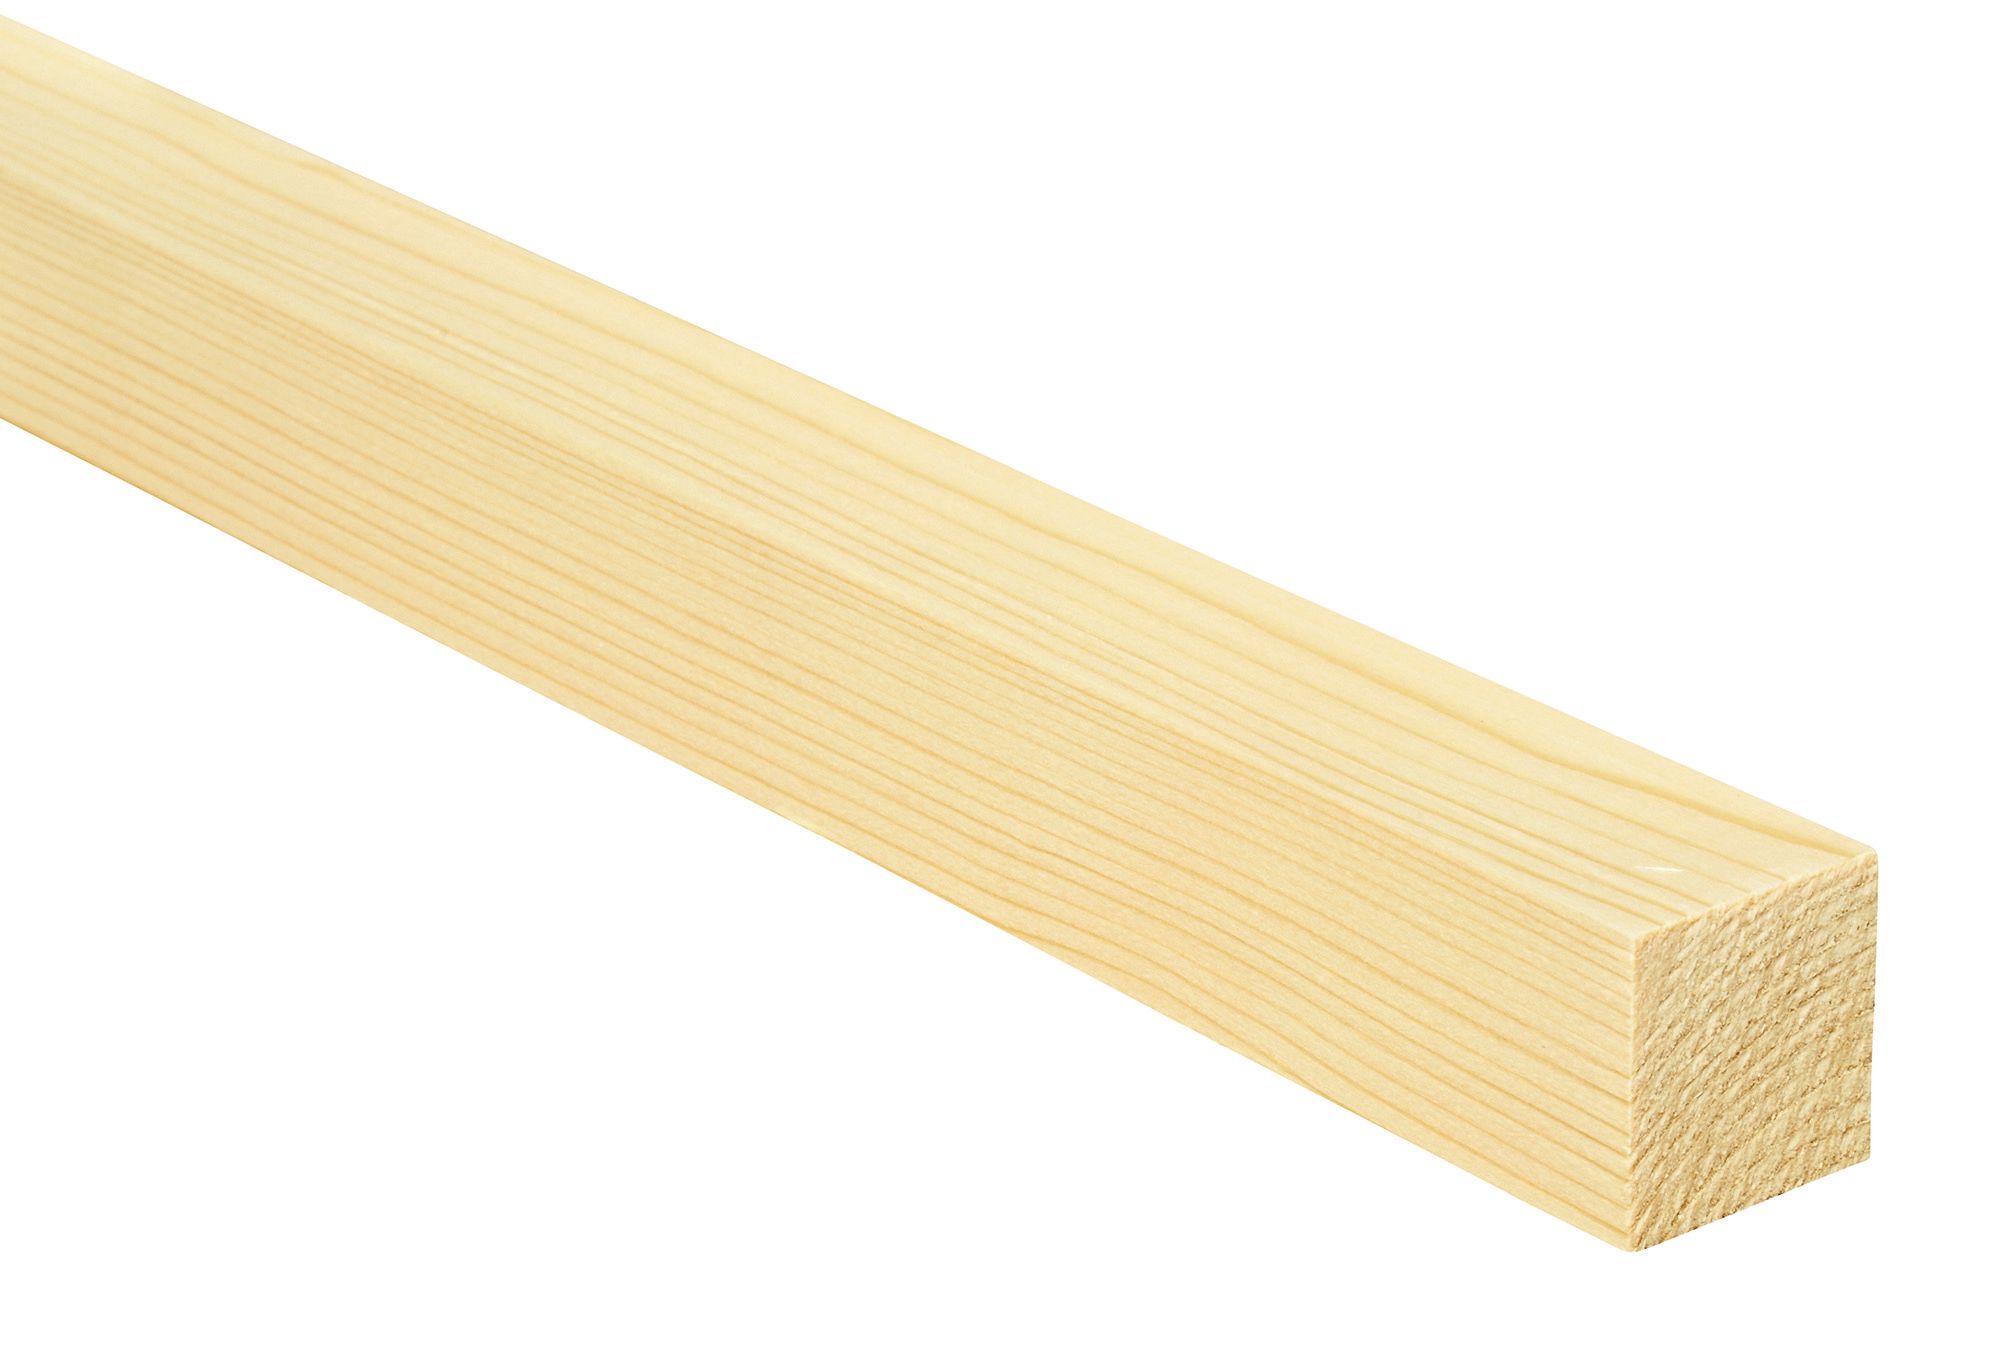 Image of Wickes Whitewood PSE Timber - 34mm x 34mm x 1800mm